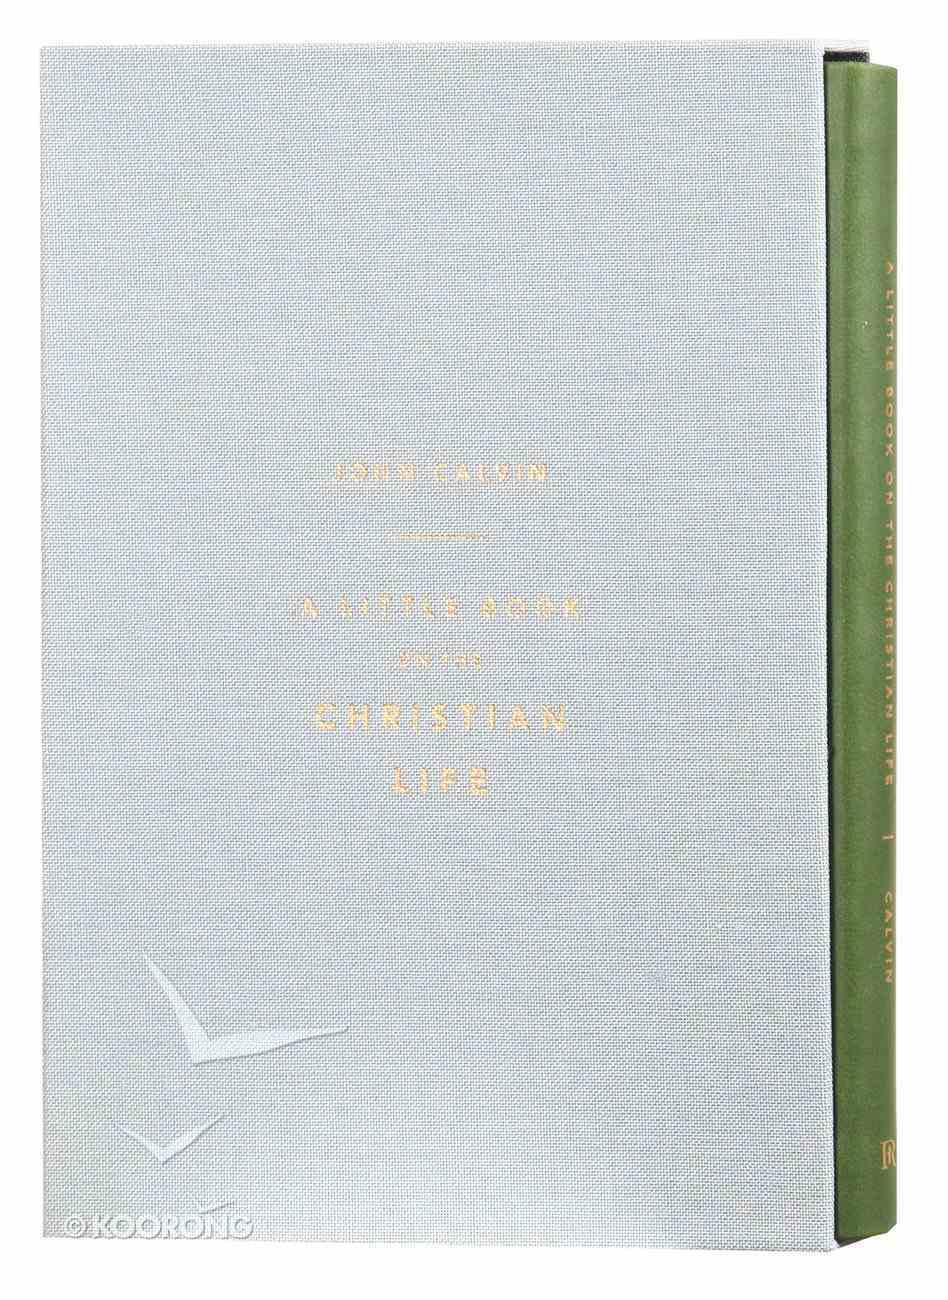 A Little Book on the Christian Life (Olive Gift Edition) Imitation Leather